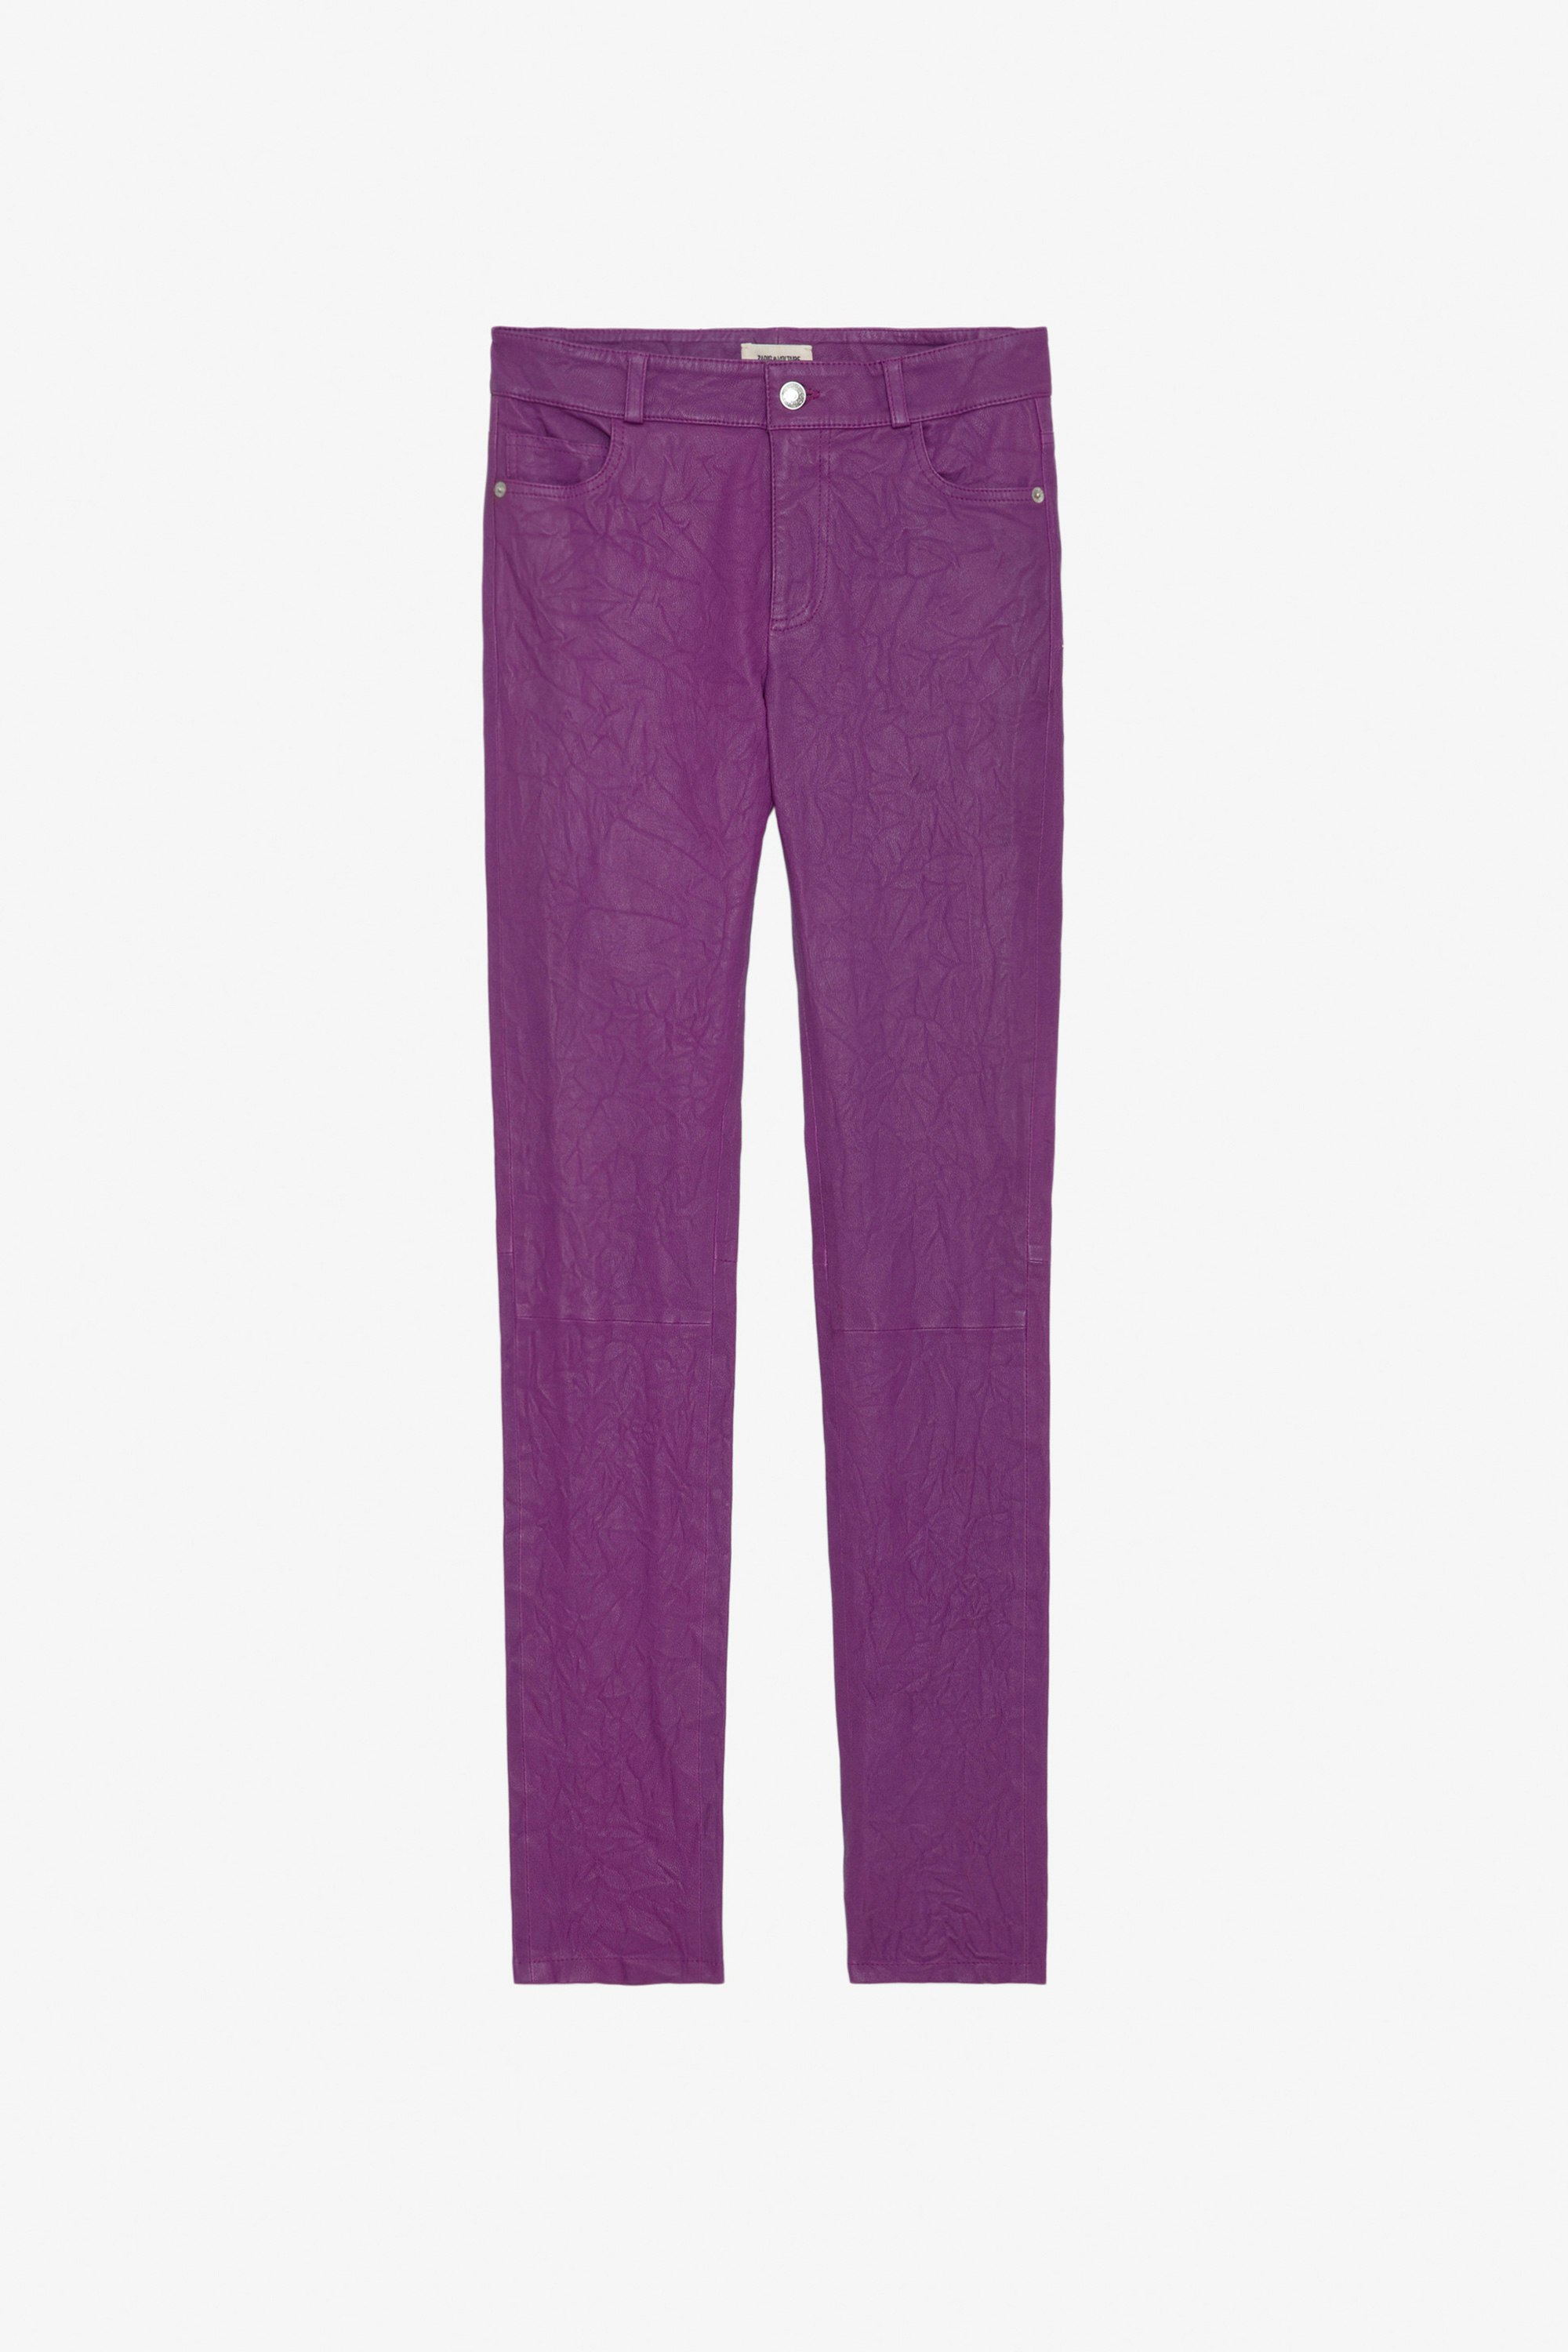 Phlame Crinkled Leather Trousers - Purple crinkled leather trousers with pockets.